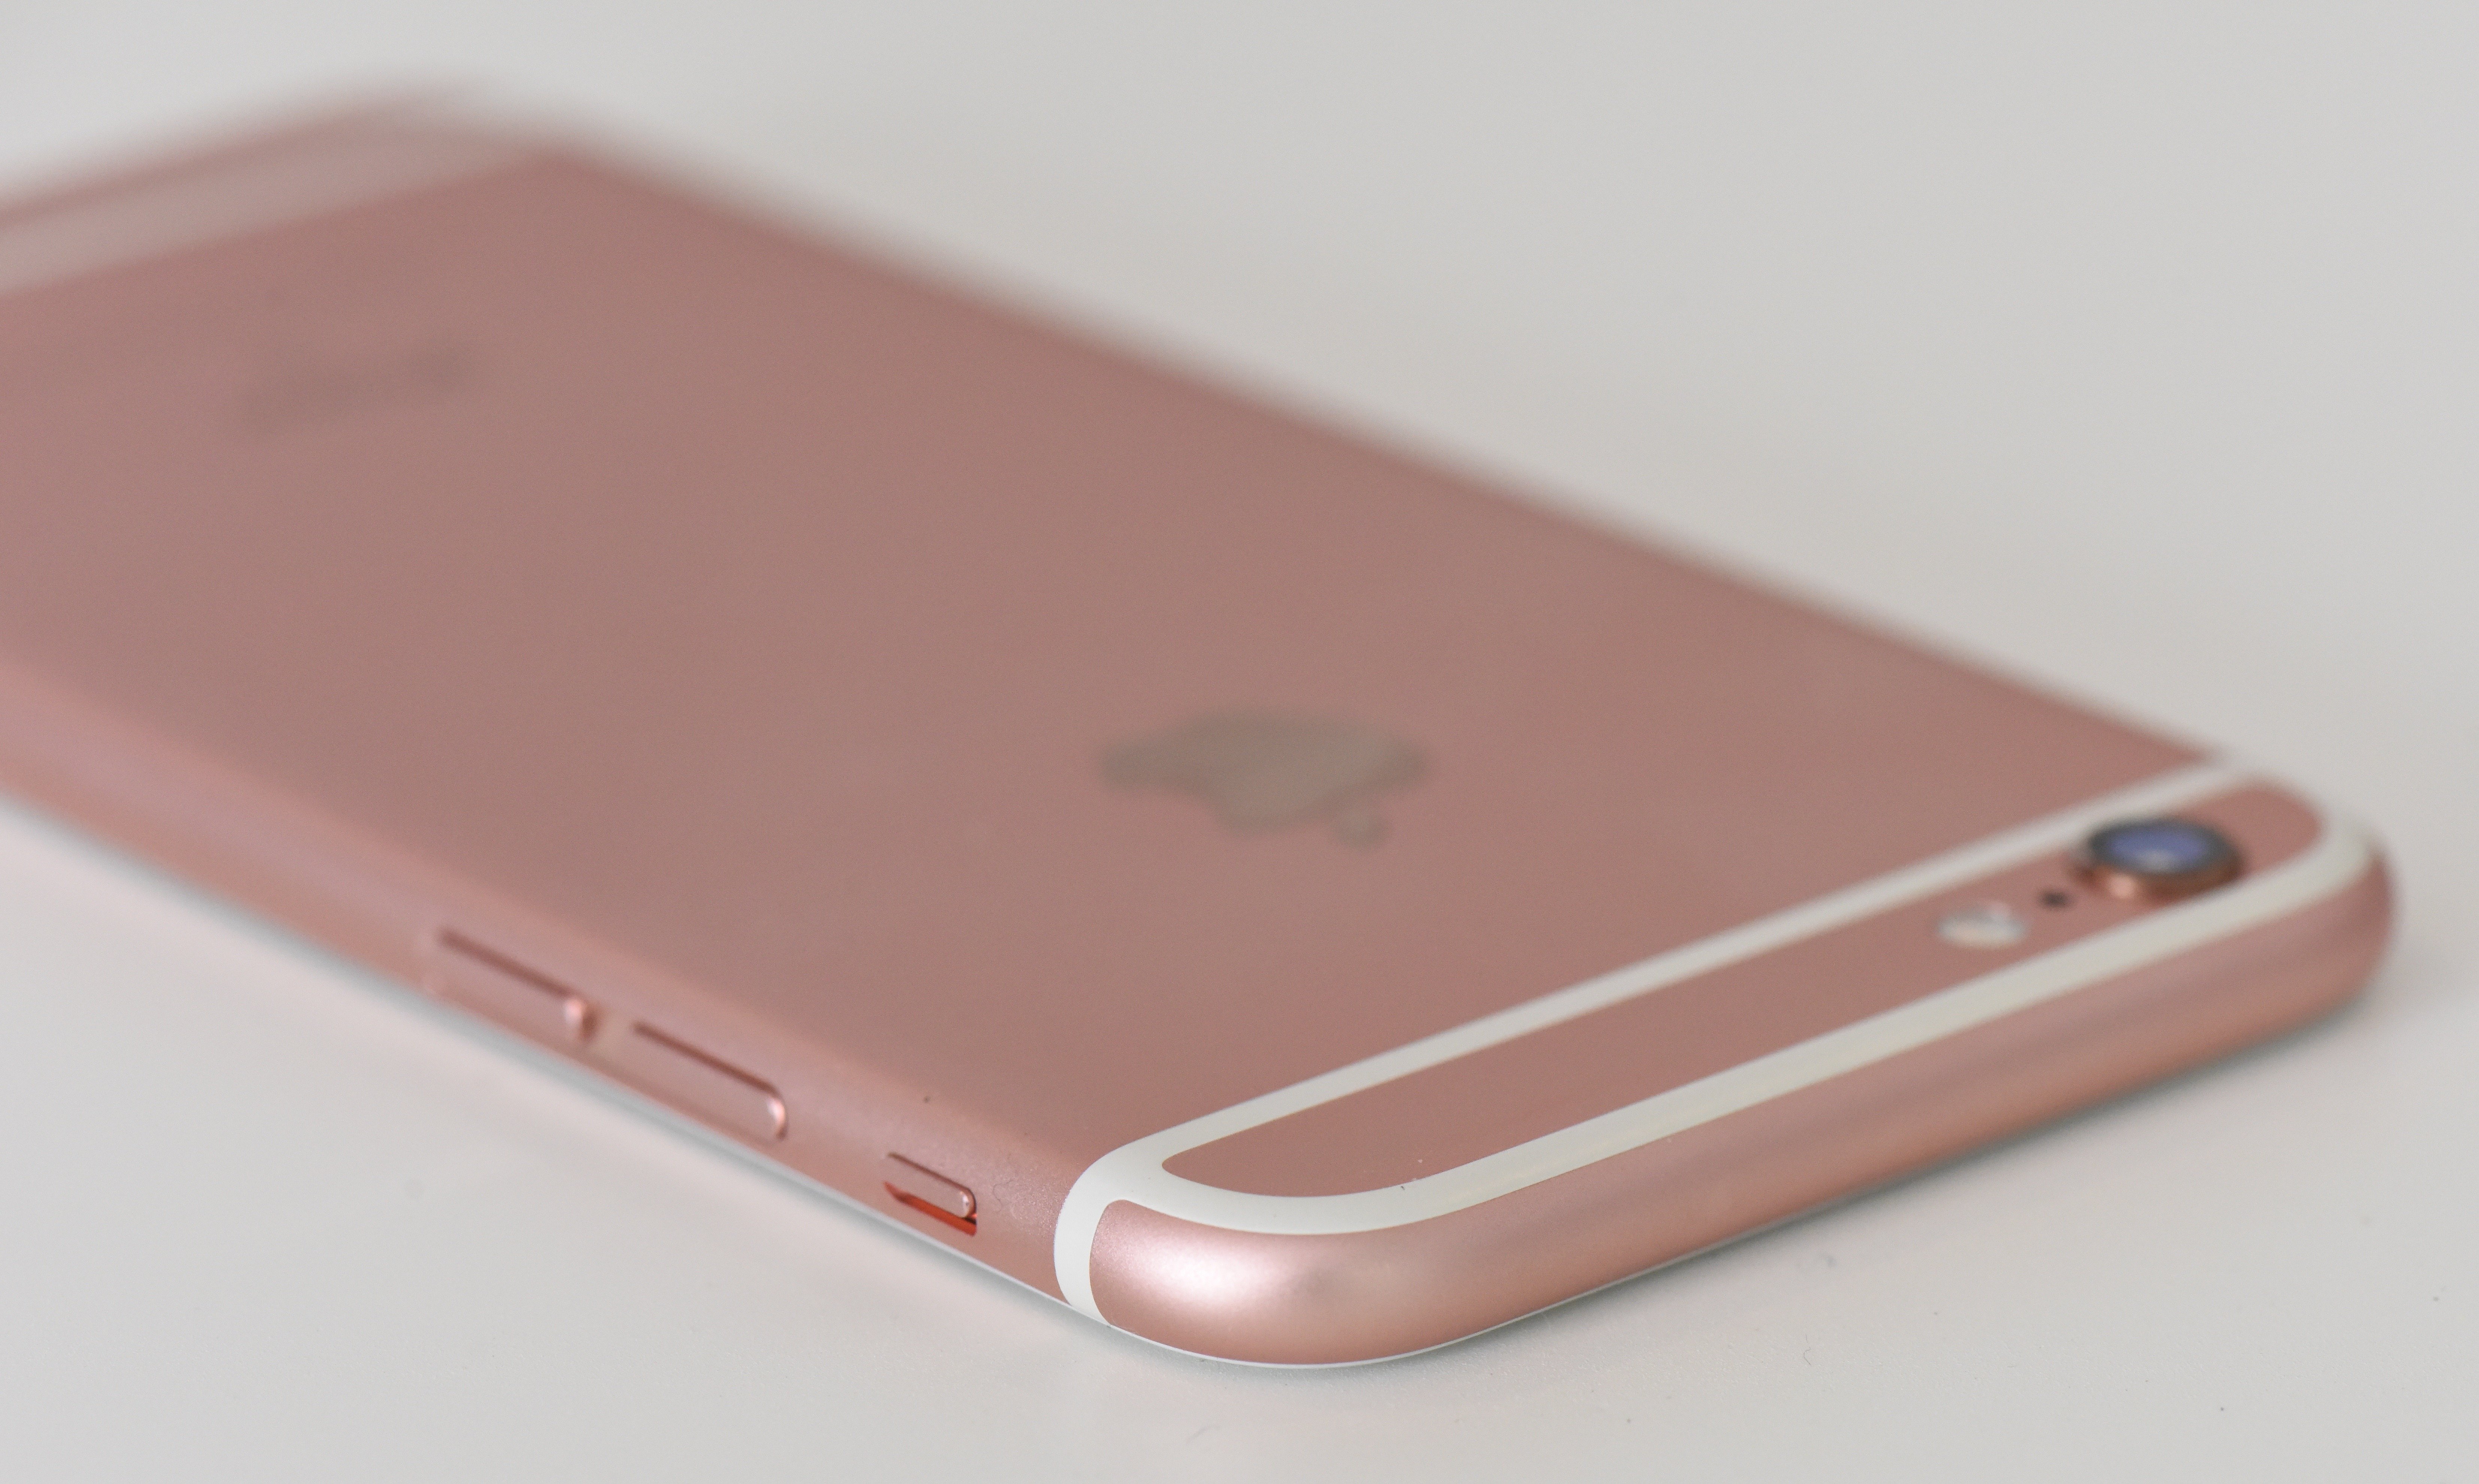 Use these tools to find the Rose Gold iPhone 6s in stock.